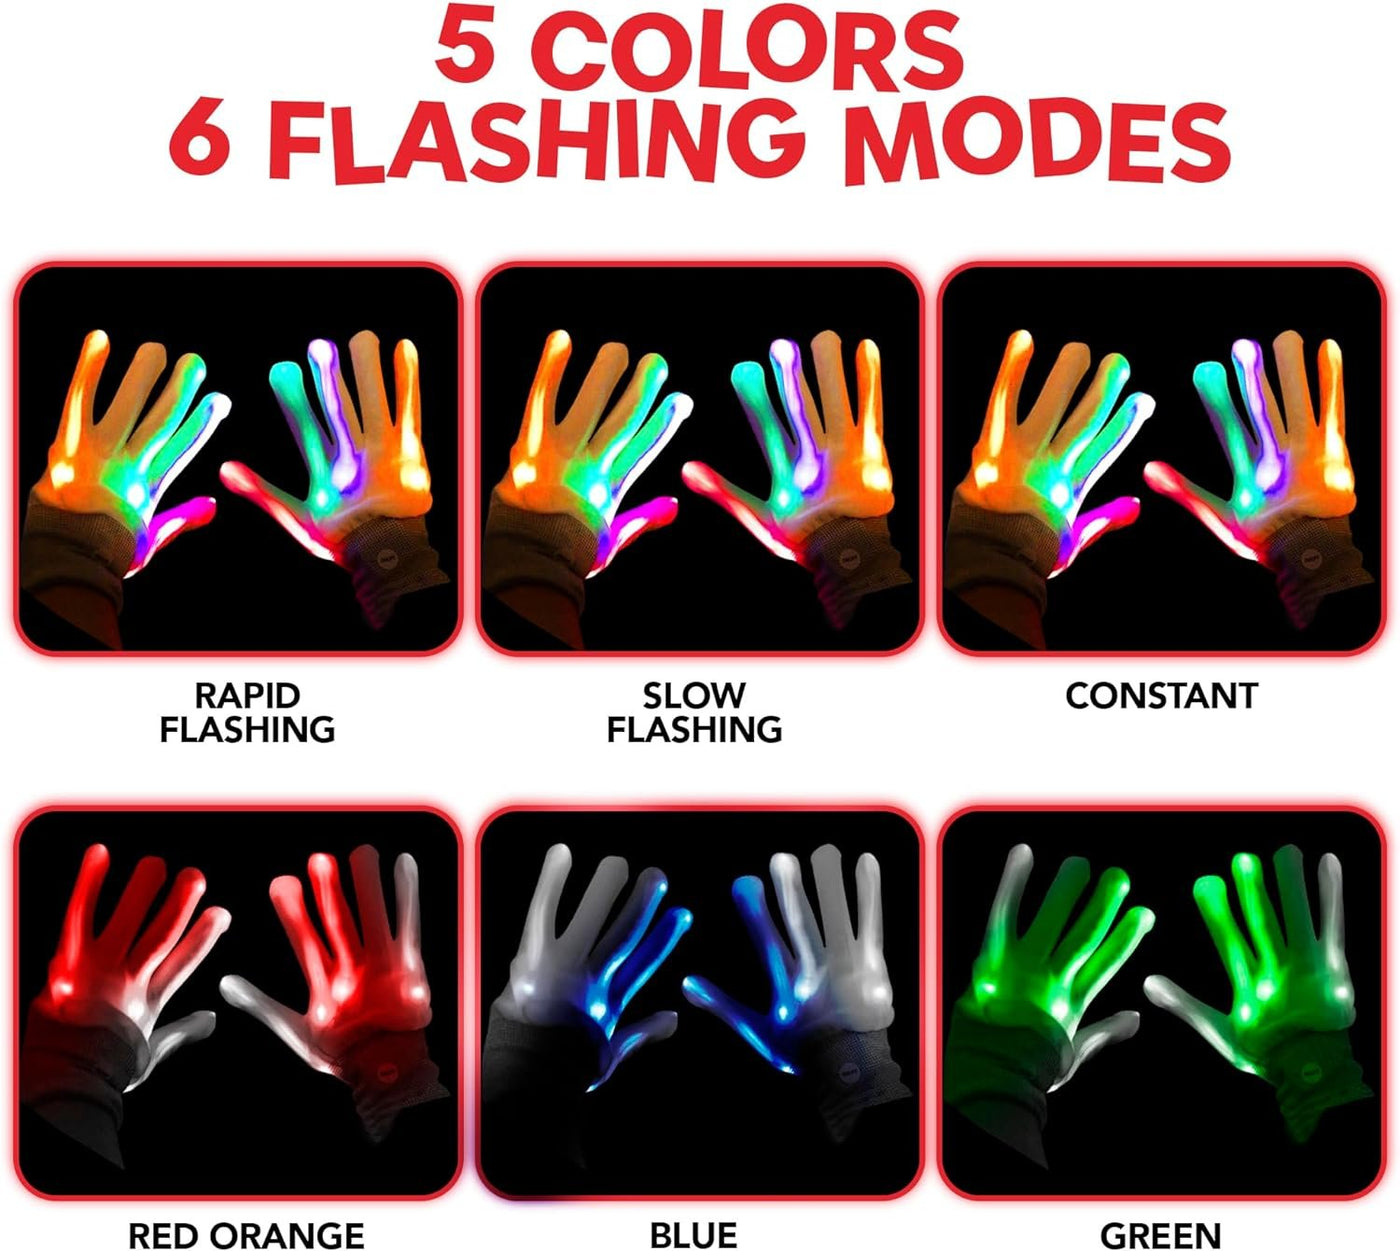 ArtCreativity Led Light Up Gloves for Kids - 1 Pair - Medium Sized Glow in the Dark Gloves with 6 Cool Flashing Modes - Kids Light Up Gloves for Halloween Costumes - Rainbow Party Favors